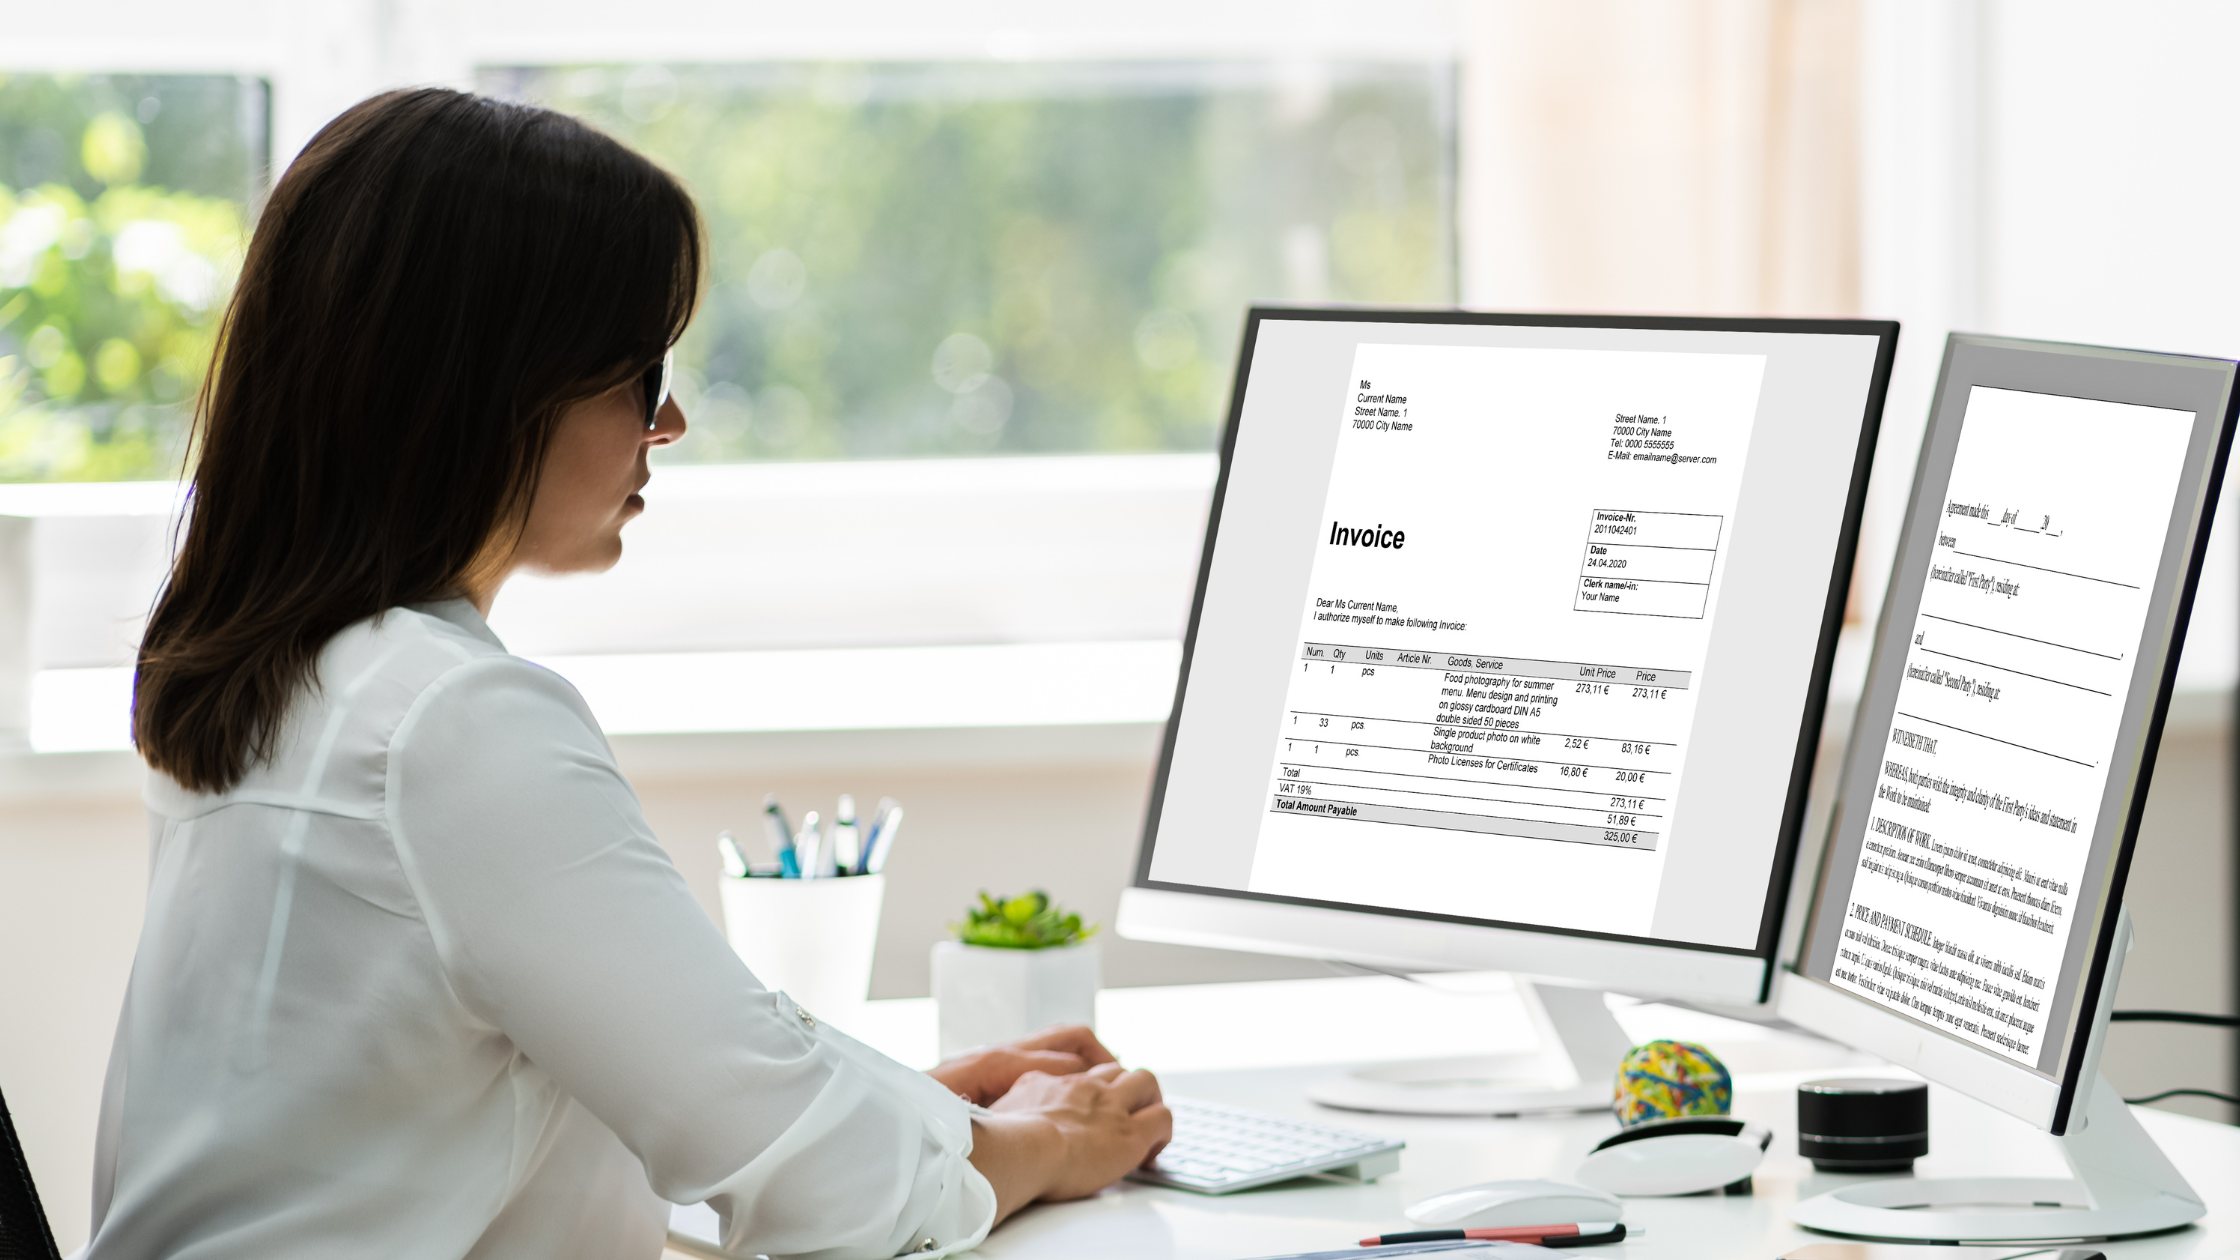 Simplify your billing processes with Internet Invoice. Customize your invoice with templates and logos, add customer and ISP plan details, and enter payment information. Generate an accurate bill in a few steps. 